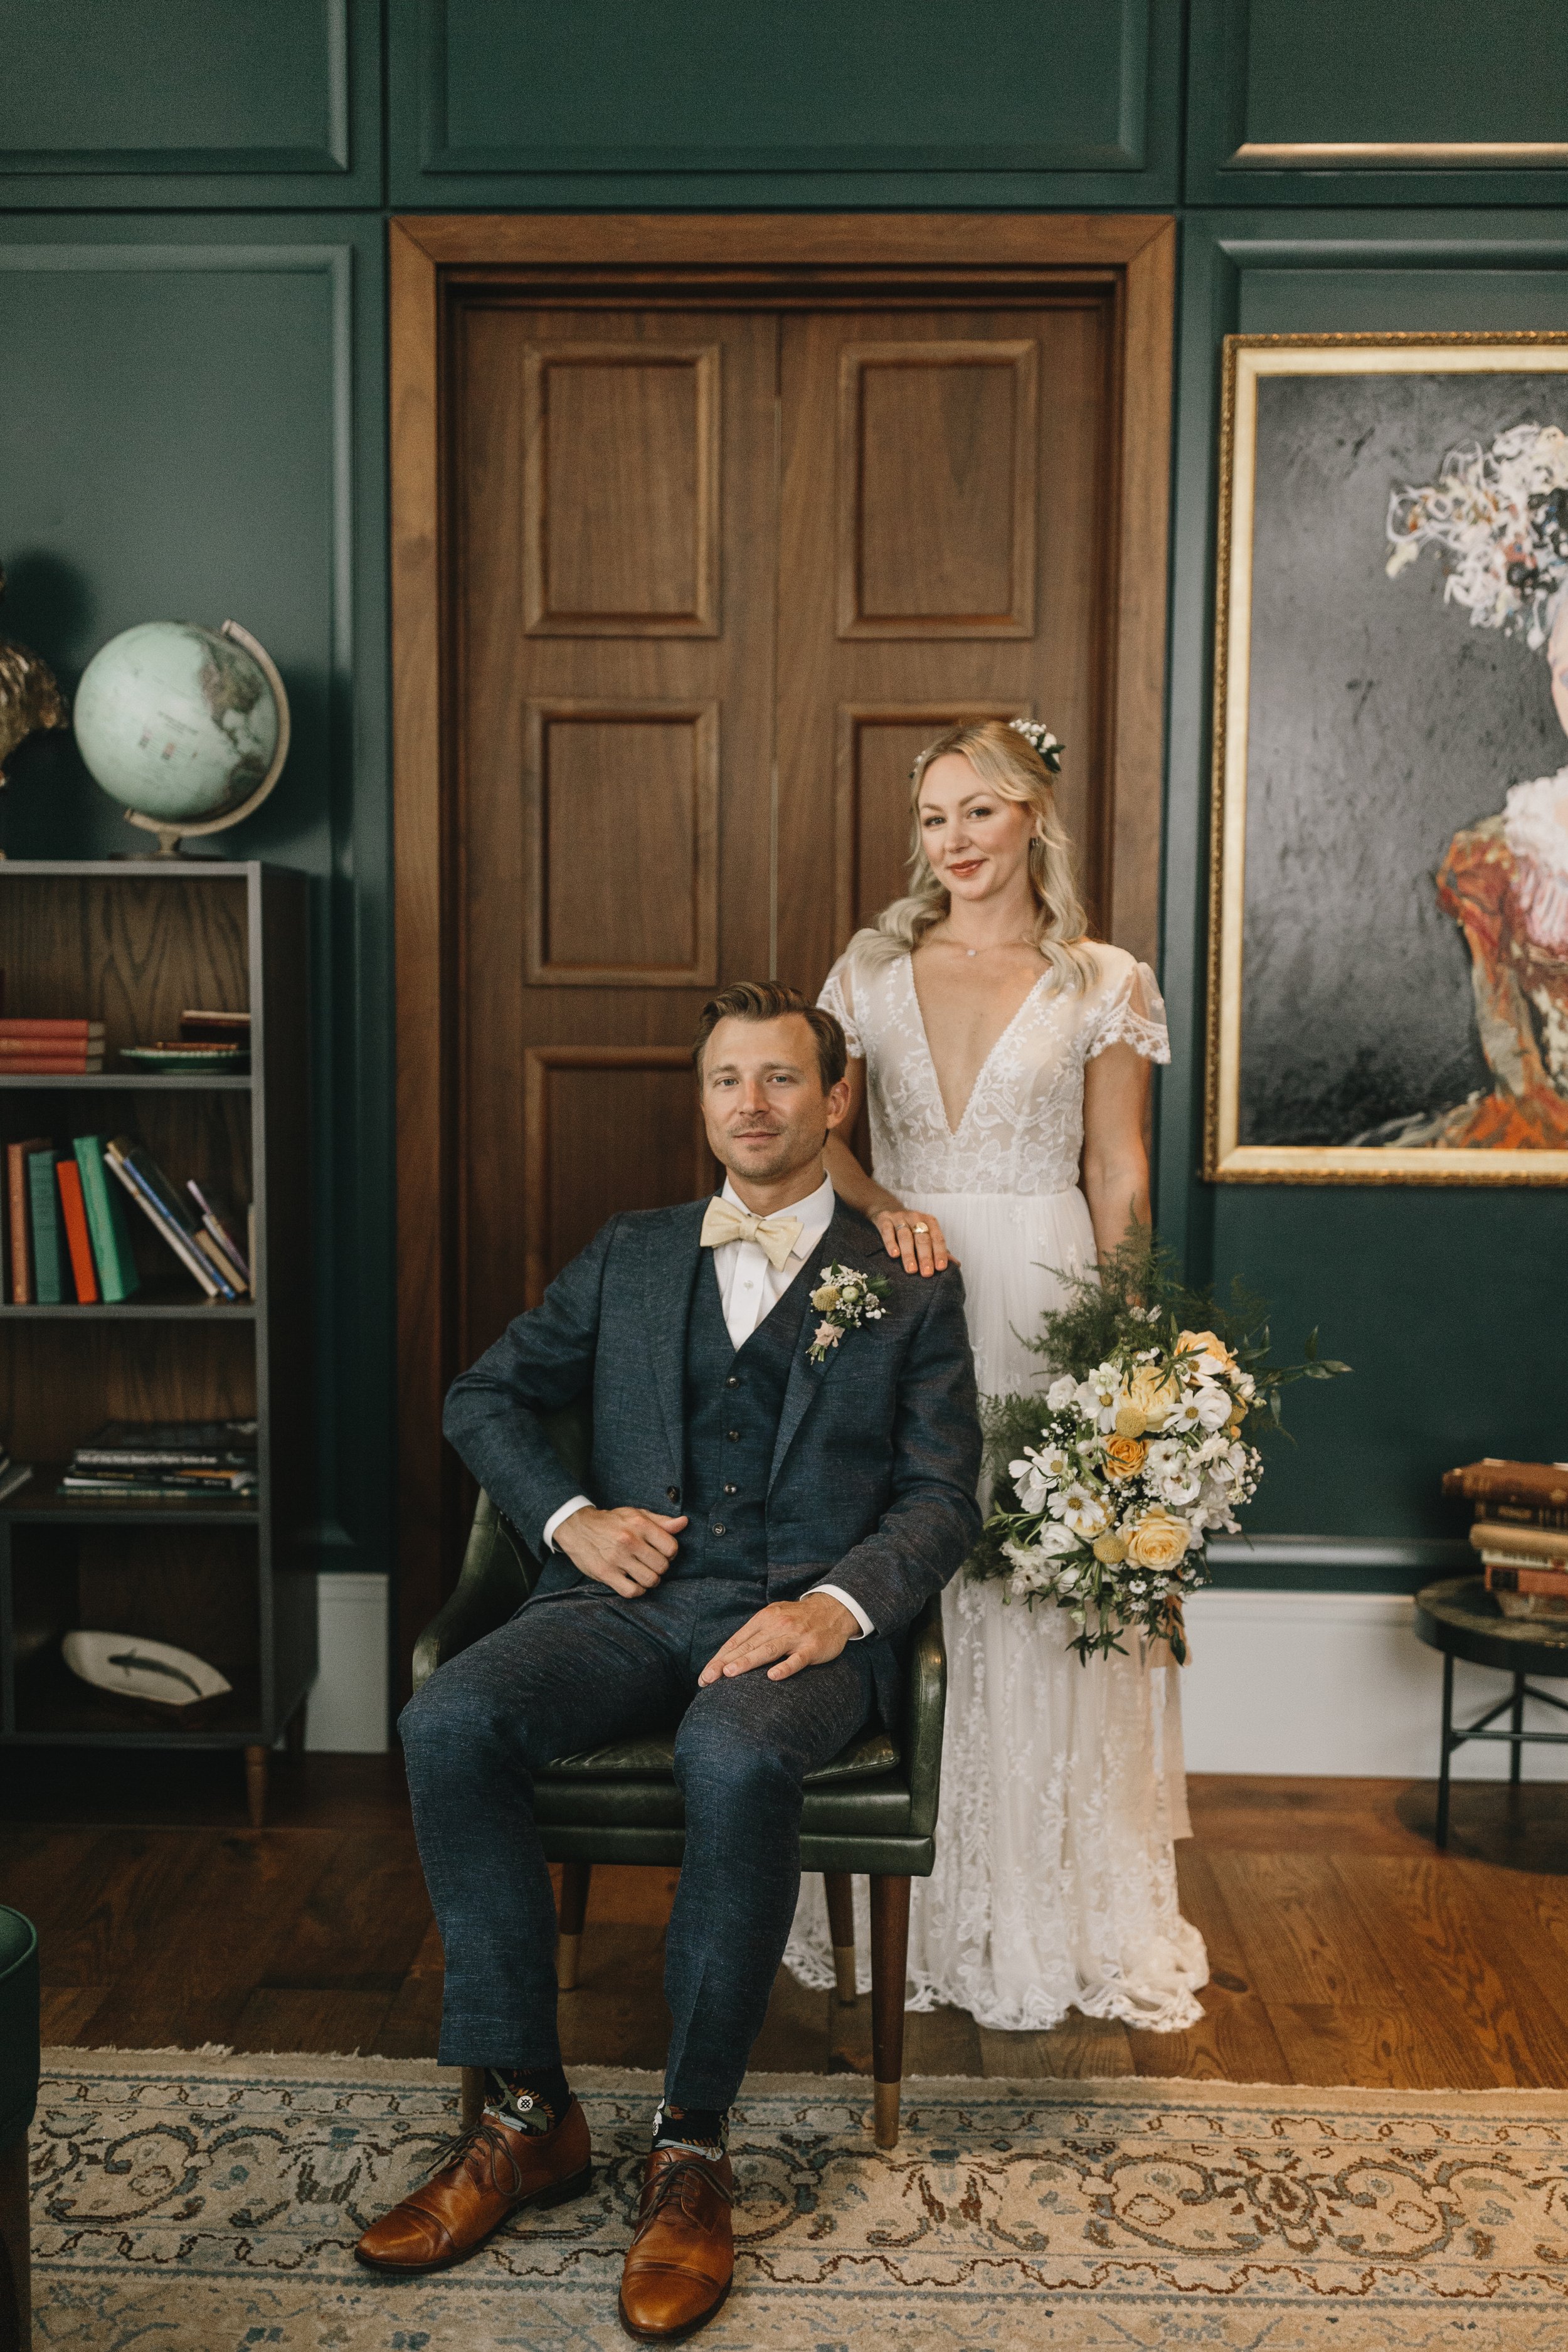 ivory-and-beau-wedding-and-florals-southern-wedding-savannah-florist-savannah-wedding-savannah-wedding-planner-the-wyld-dock-bar-historic-savannah-georgia-wedding-flowers-wedding-blog-wedding-inspiration-LAUREN+NICK_WEDDING-242.jpg